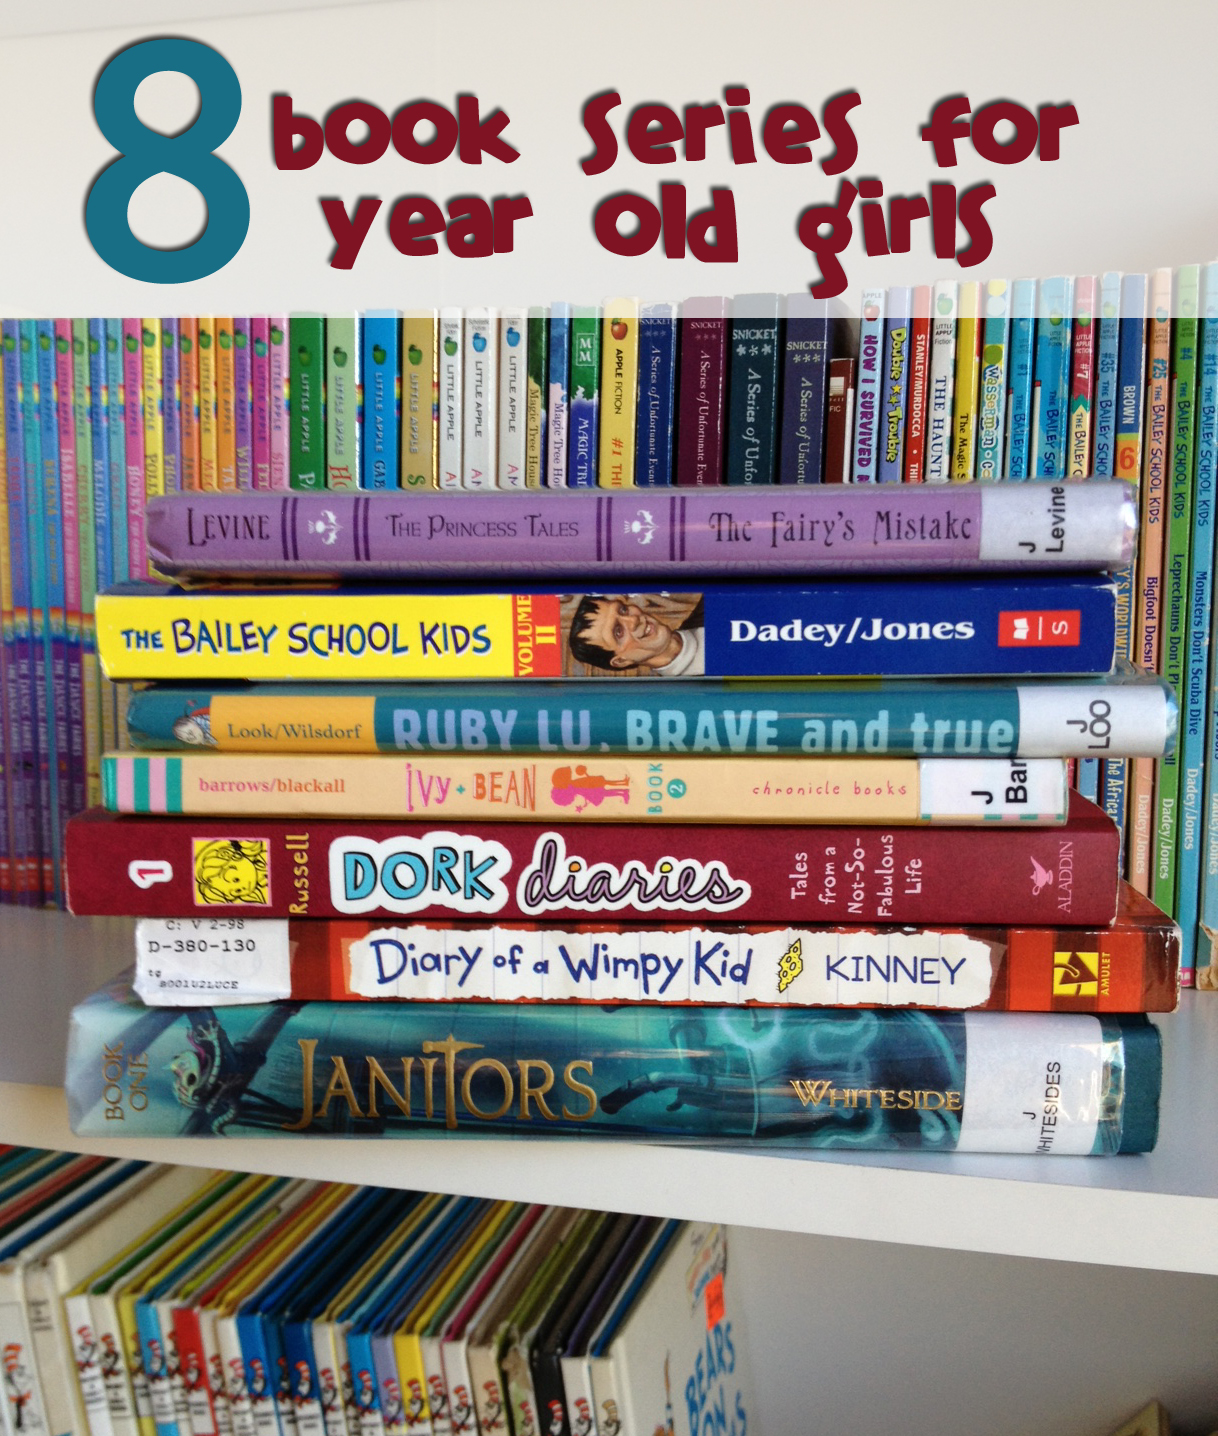 g-rated-good-books-8-9-year-old-girls